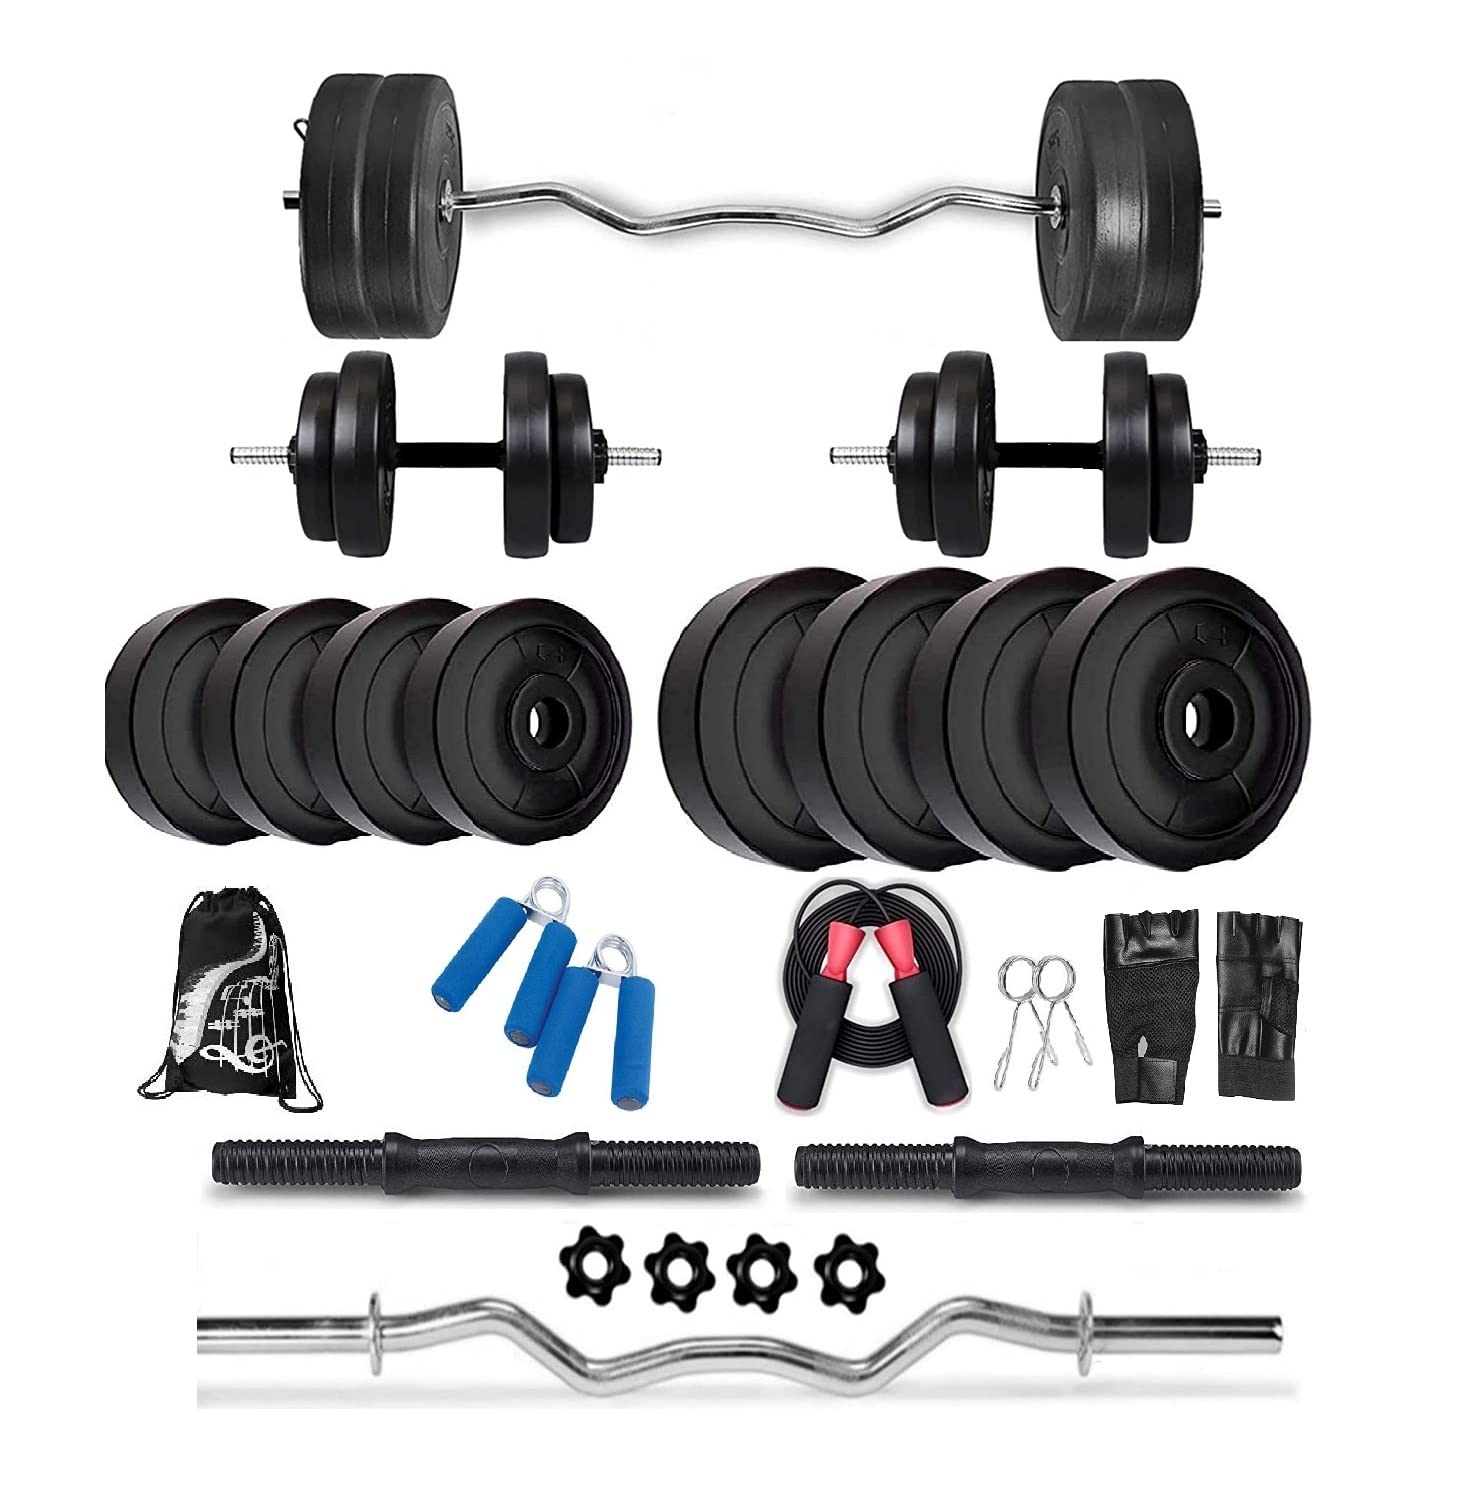 https://www.sportswing.in/wp-content/uploads/2021/12/Bodyfit-Home-Gym-Combo-Home-Gym-Set-Gym-Equipment-18Kg-with-3ft-Curl-Rod-One-Pair-Dumbbell-Rods-Weight-Plates-Exercise-Set-Home-Gym-Kit-with-Accessories-18KG-Combo-1.jpg